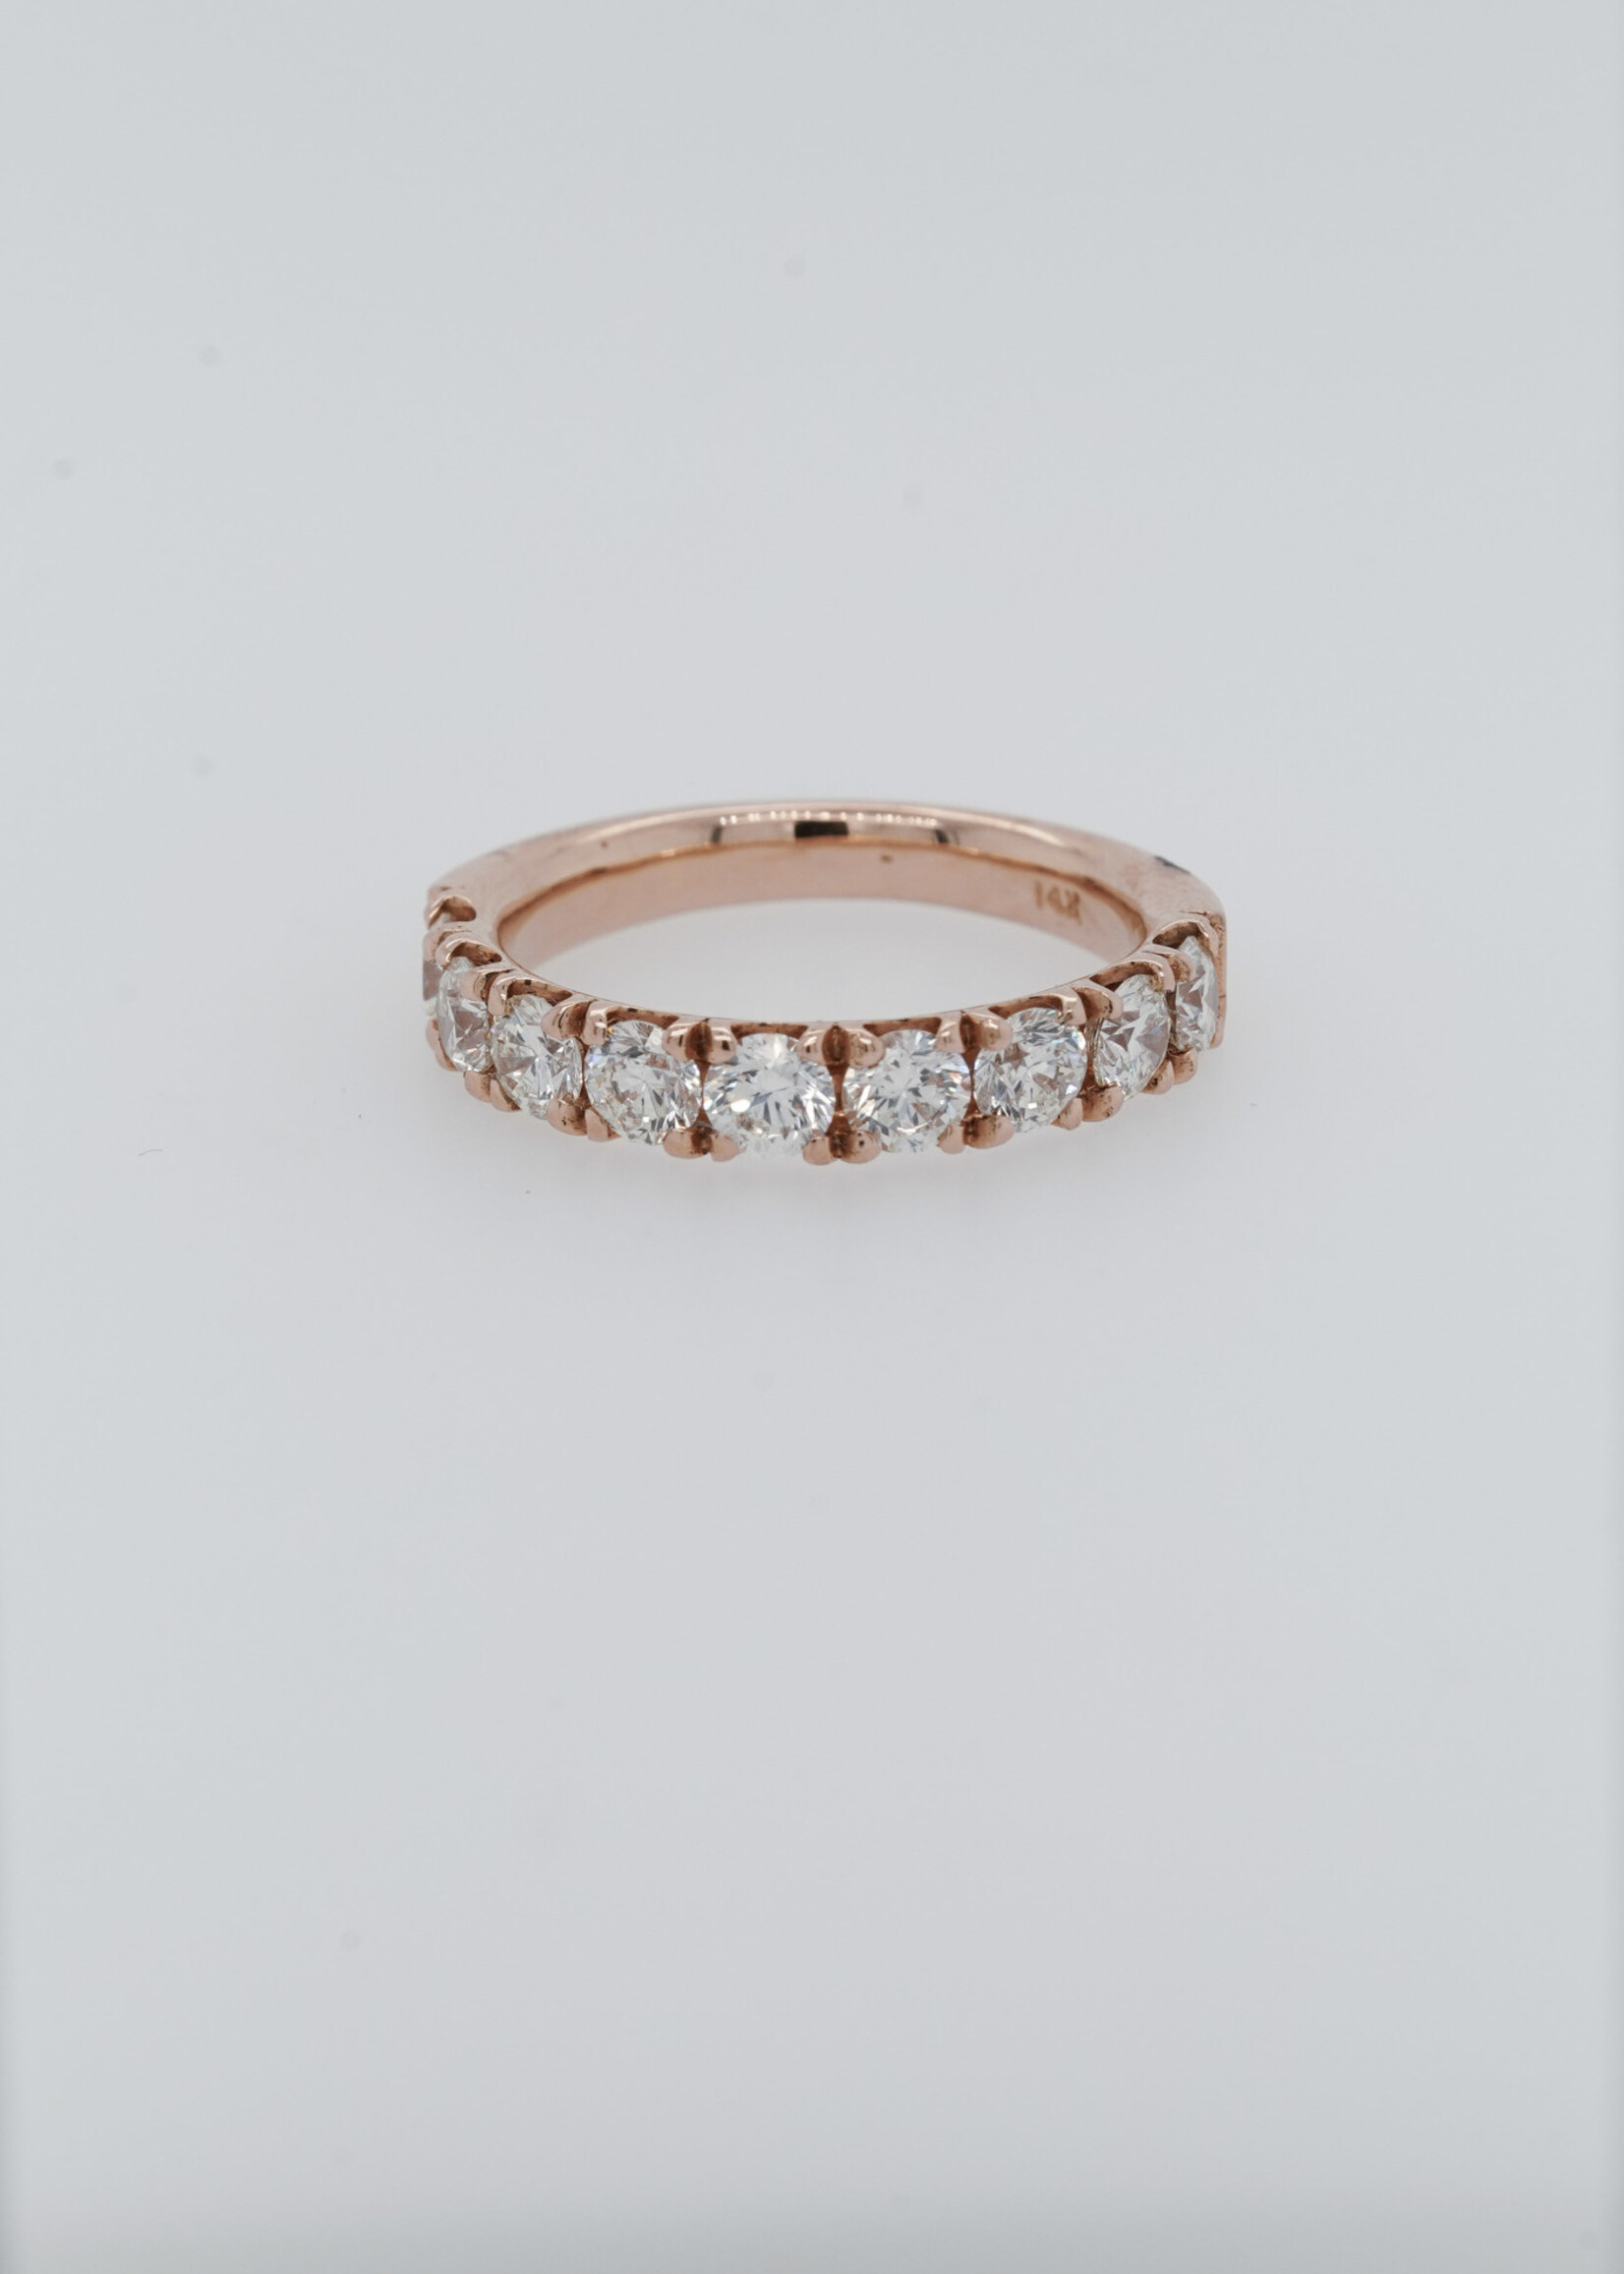 14KR 3.9g 1.50ctw Diamond U-Prong Stackable Band (size 6.5)